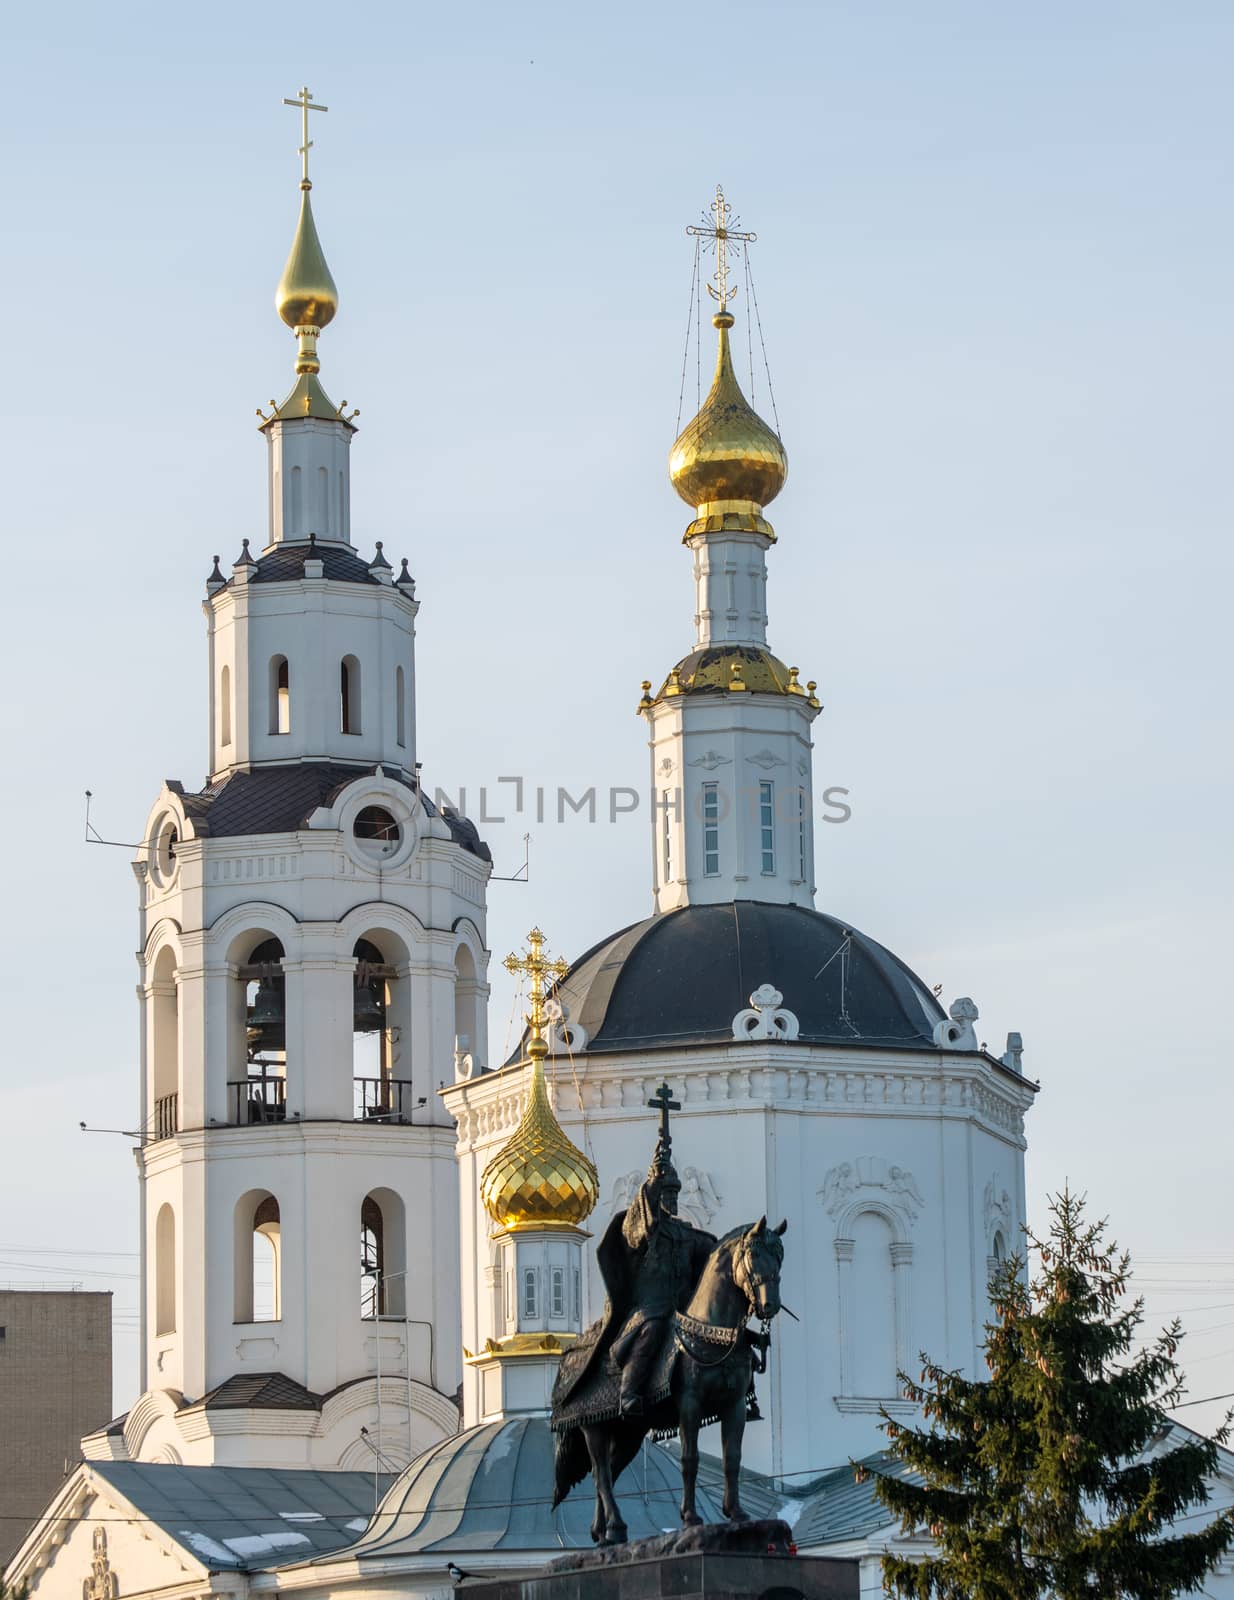 Monument to Russian Tsar Ivan IV the terrible and Epiphany Cathedral in the city of Orel.